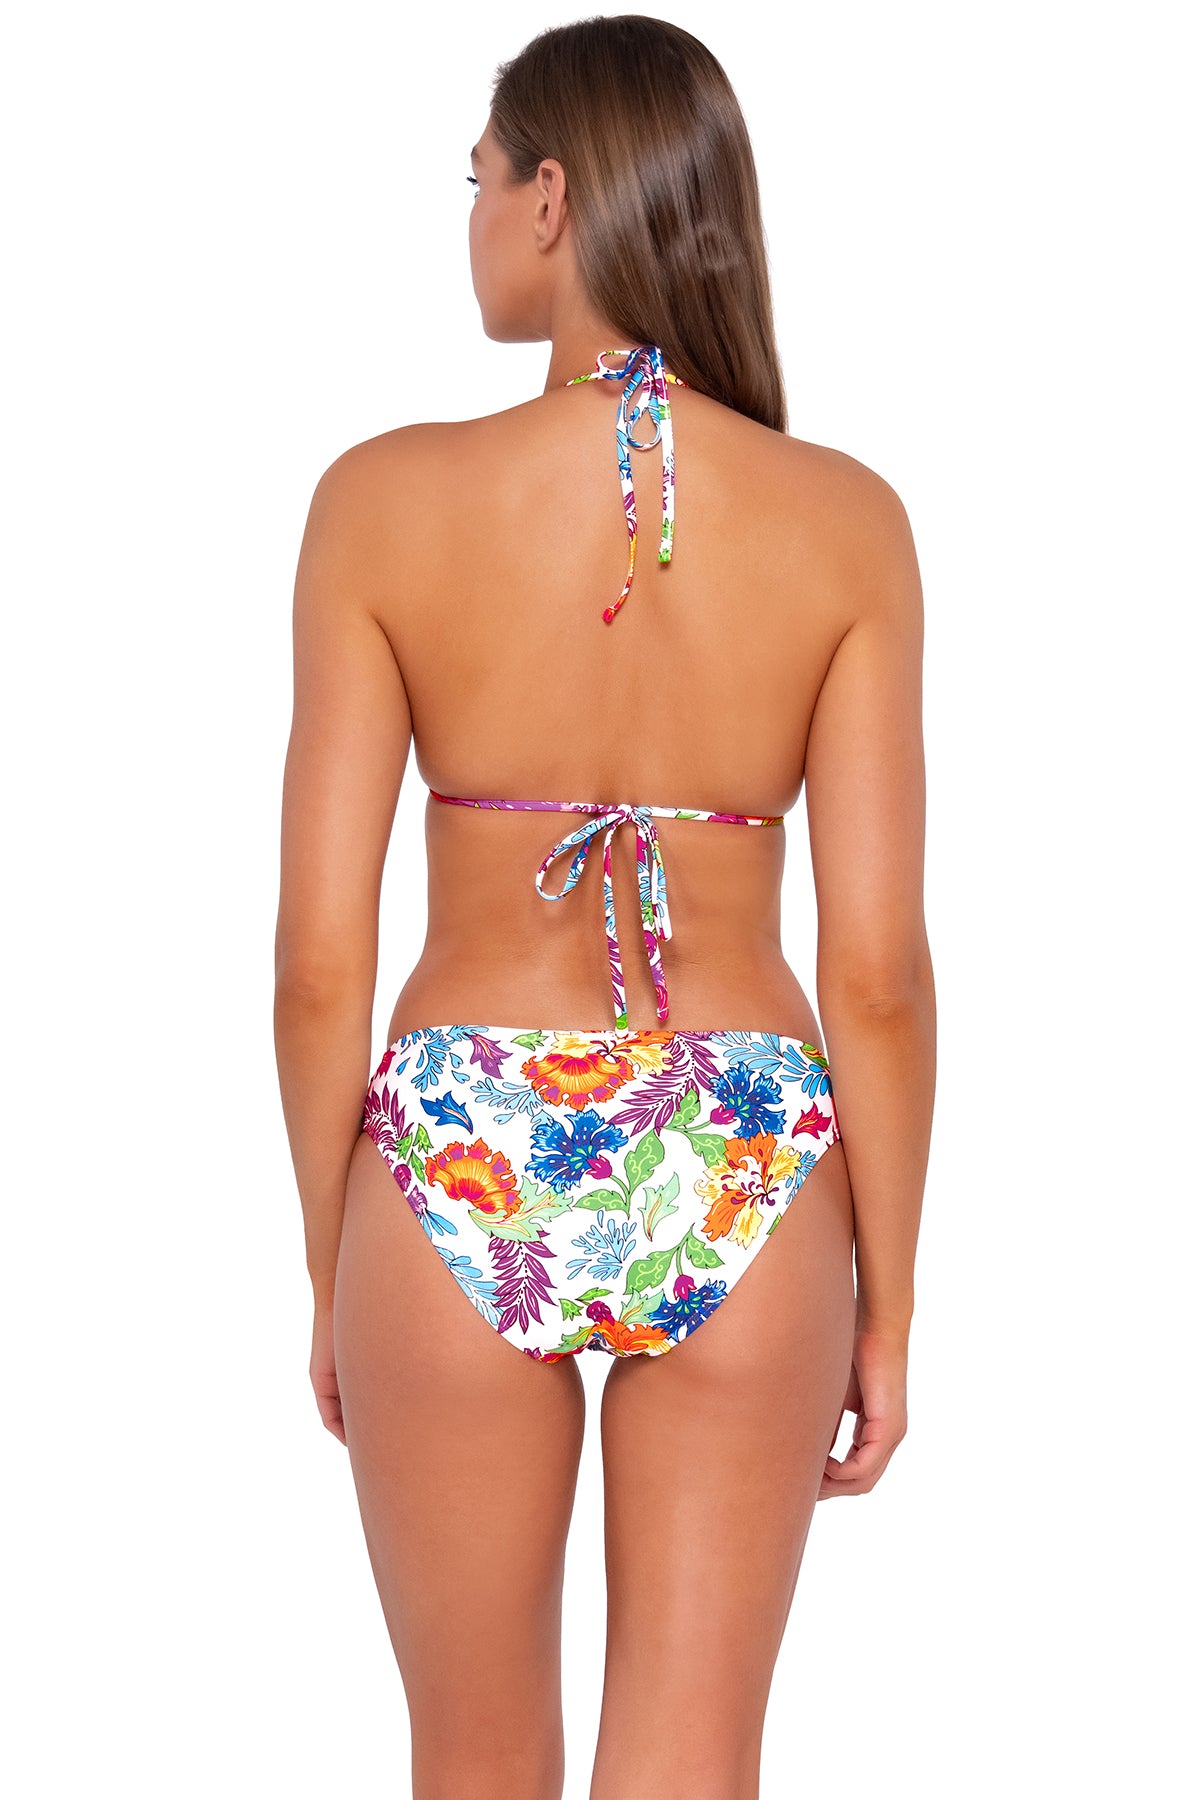 Back pose #1 of Daria wearing Sunsets Camilla Flora Laney Triangle Top with matching Audra Hipster bikini bottom